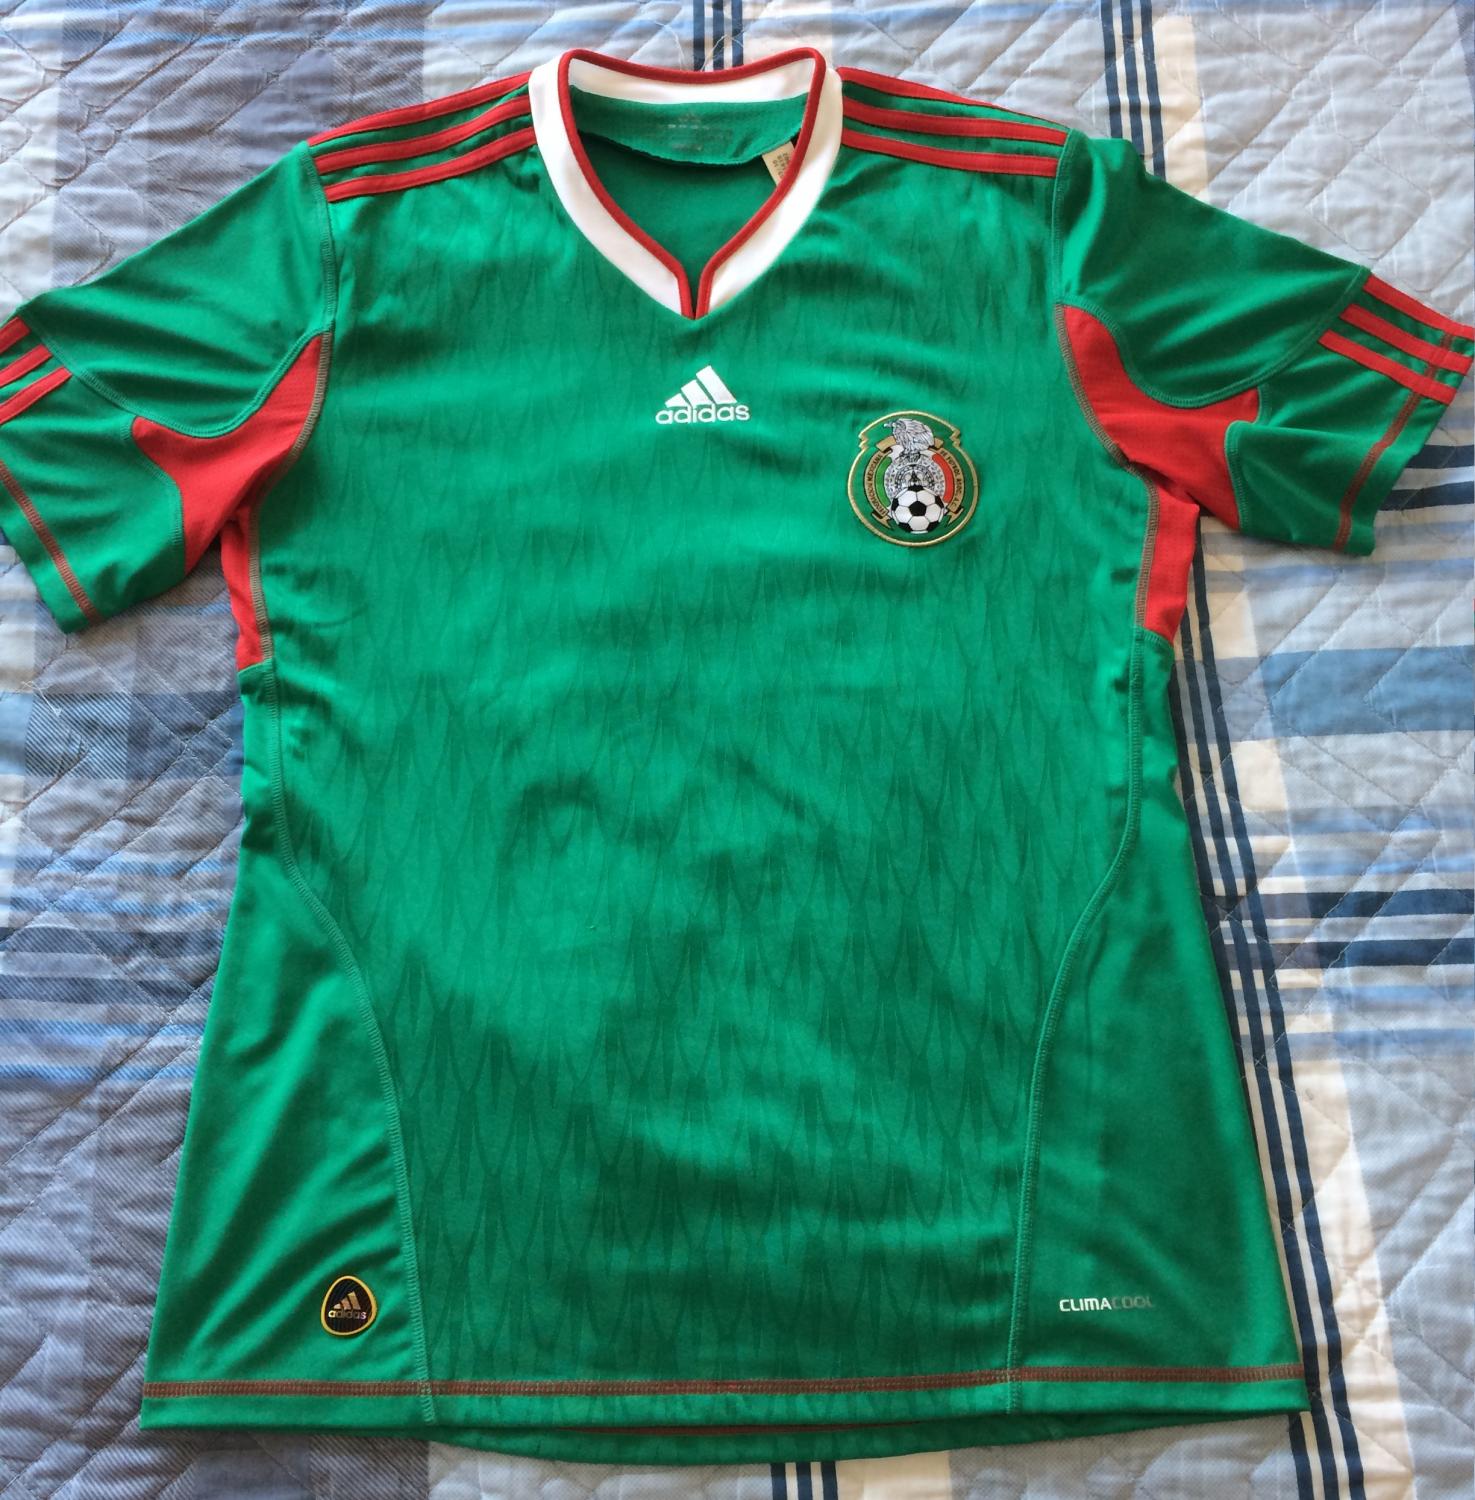 mexico jersey 2011